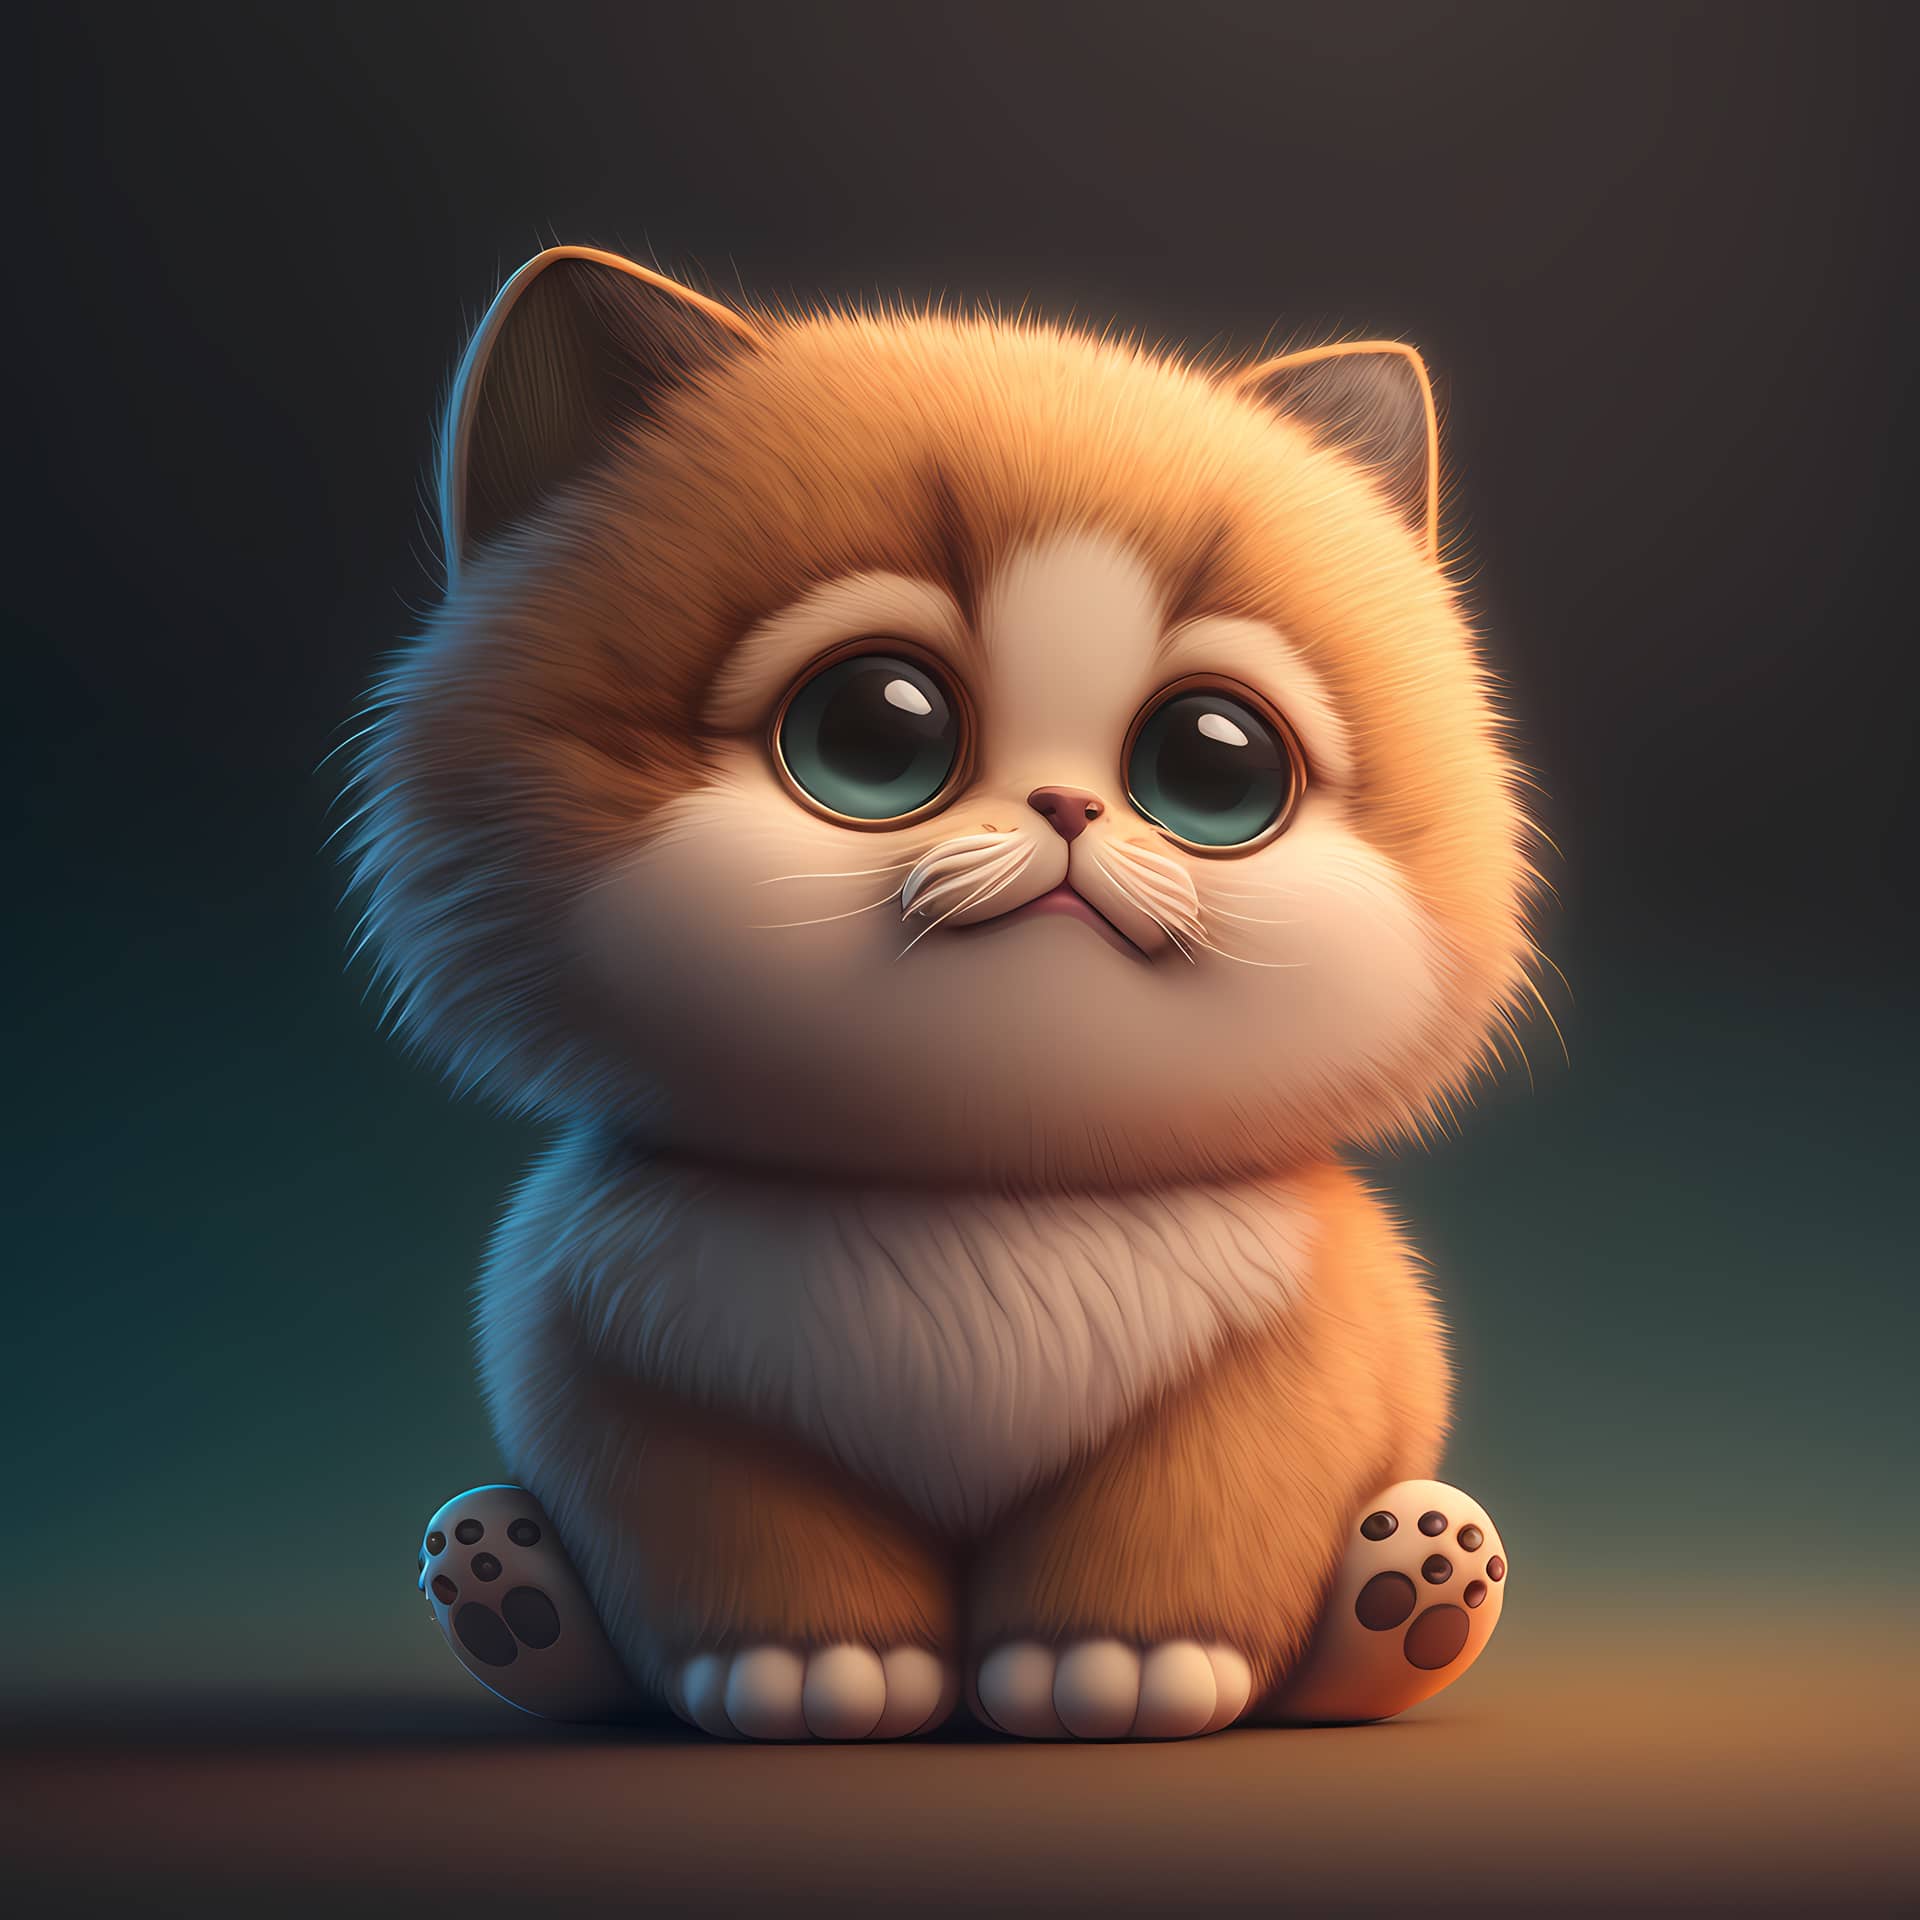 Cute profile photos adorable cute chubby cat 3d render nice image